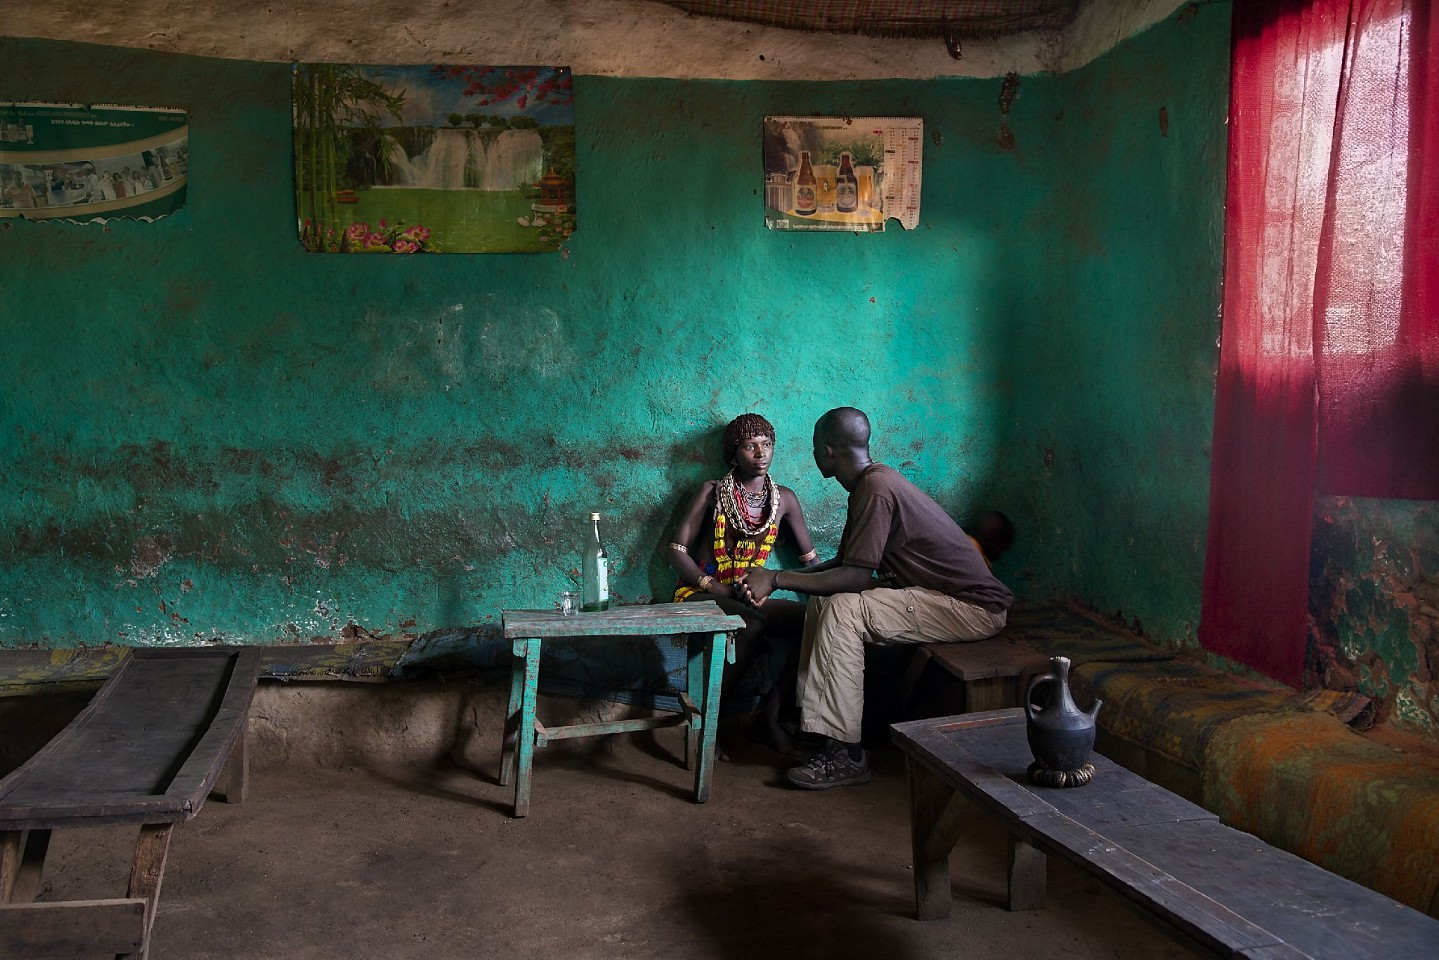 Steve McCurry, Couple Converses at Cafe, 2012
FujiFlex Crystal Archive Print
Price/Size on request